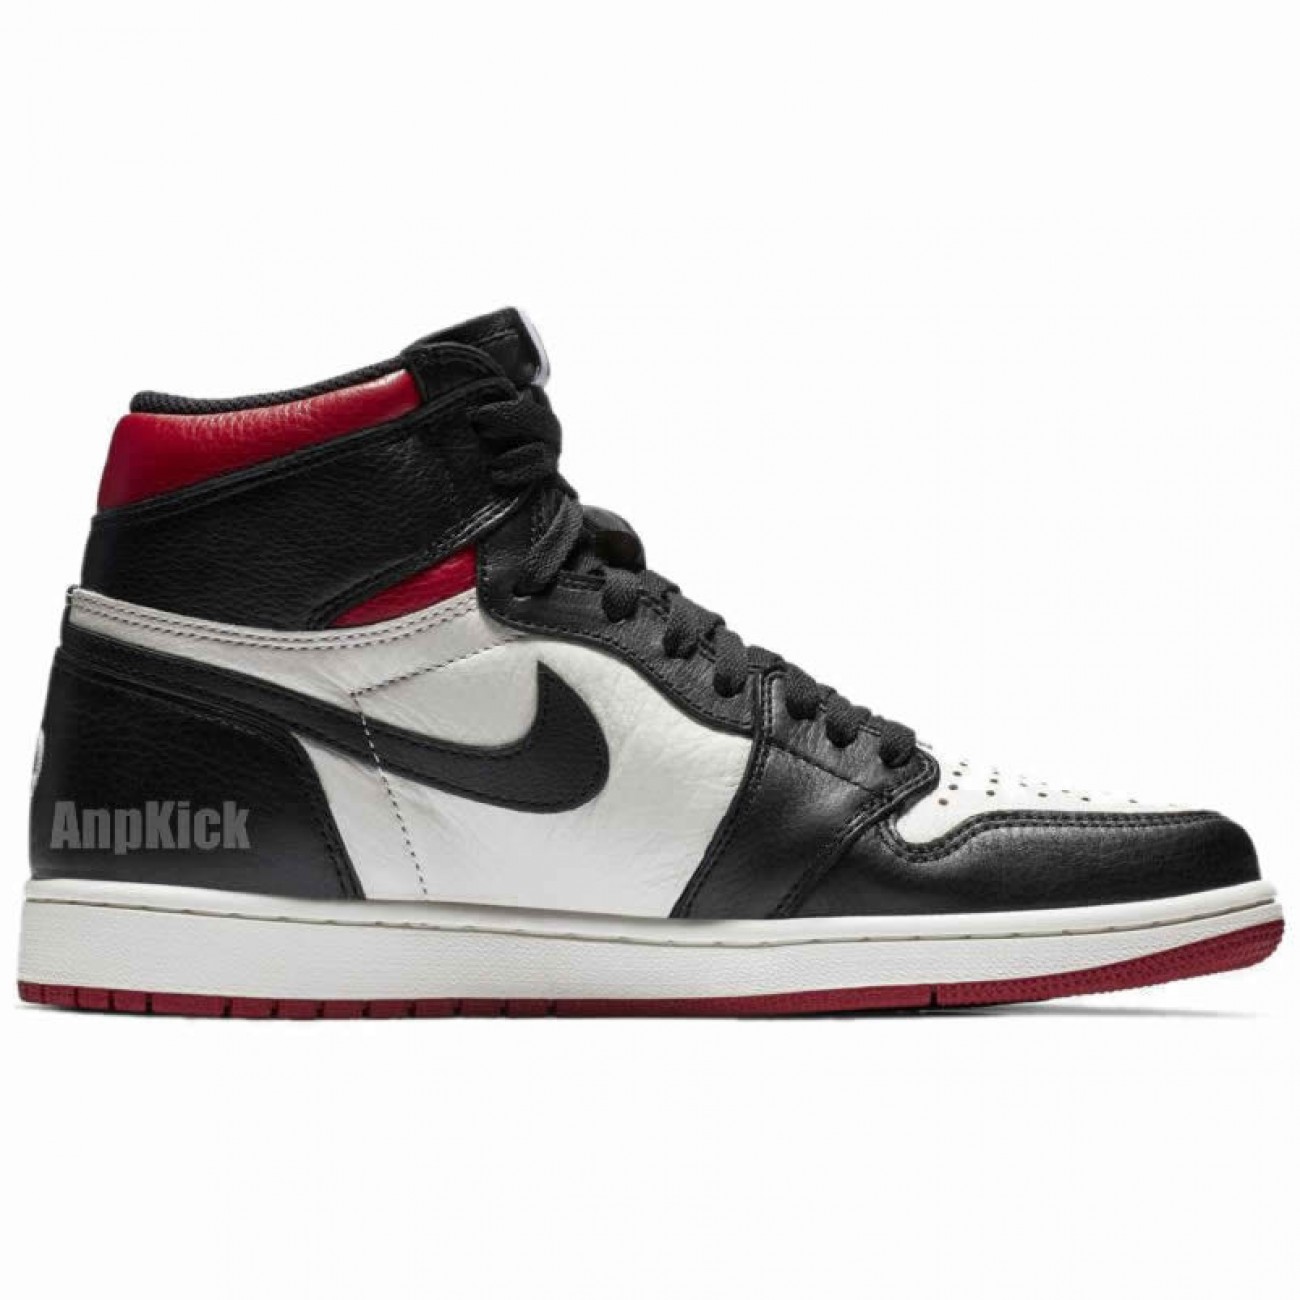 Air Jordan 1 "NO L'S" Not For Resale Release Date For Sale 861428-106